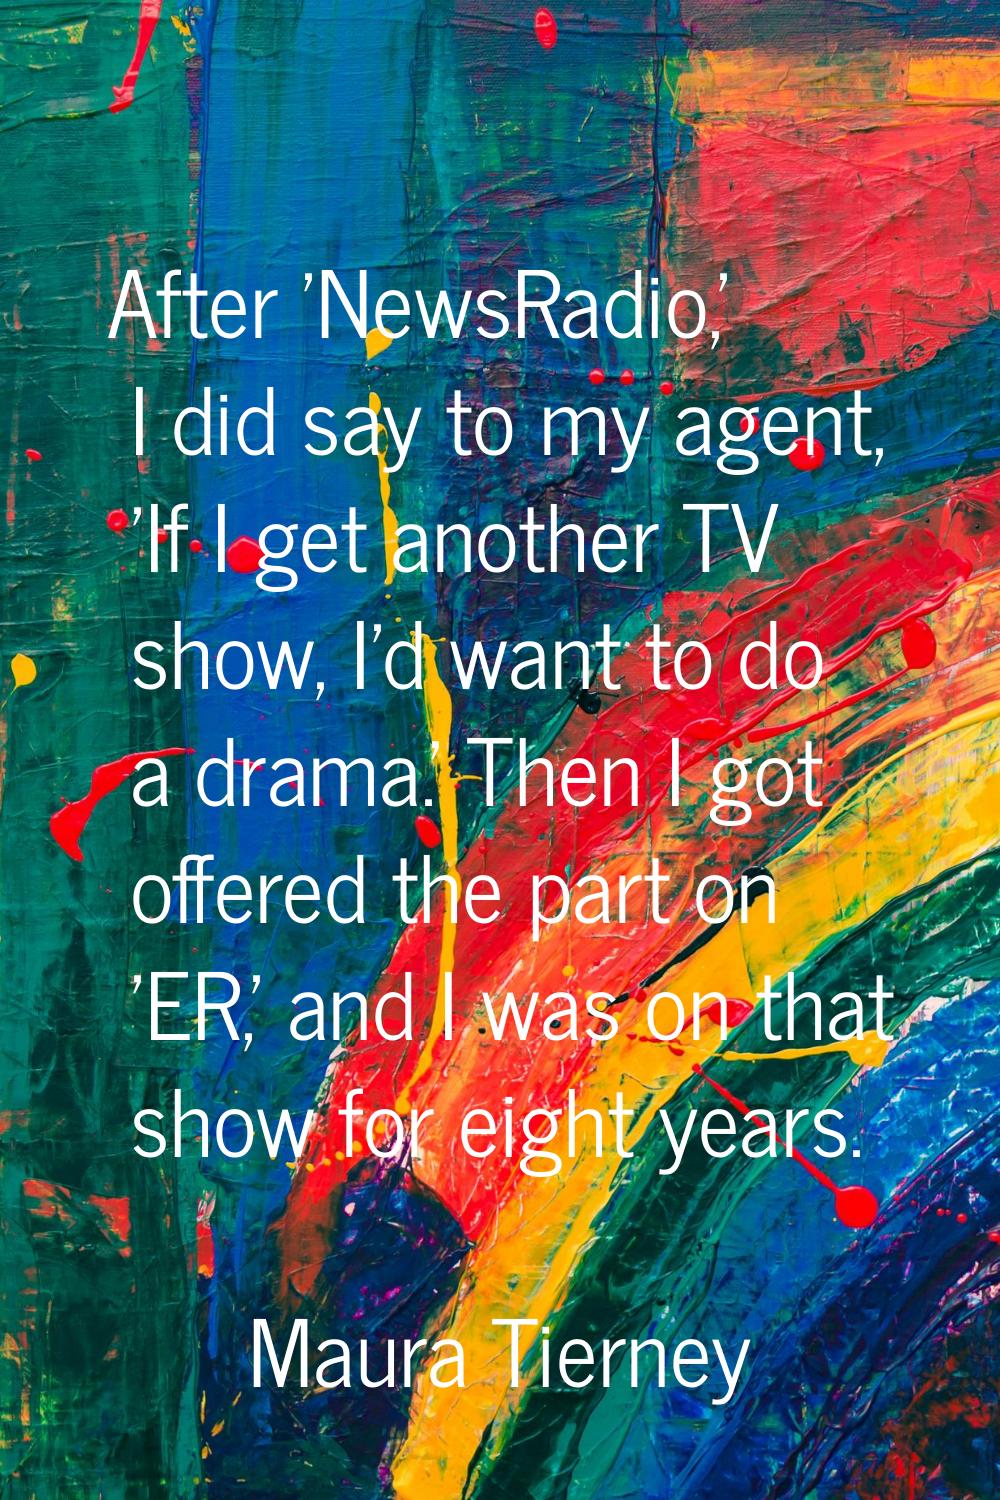 After 'NewsRadio,' I did say to my agent, 'If I get another TV show, I'd want to do a drama.' Then 